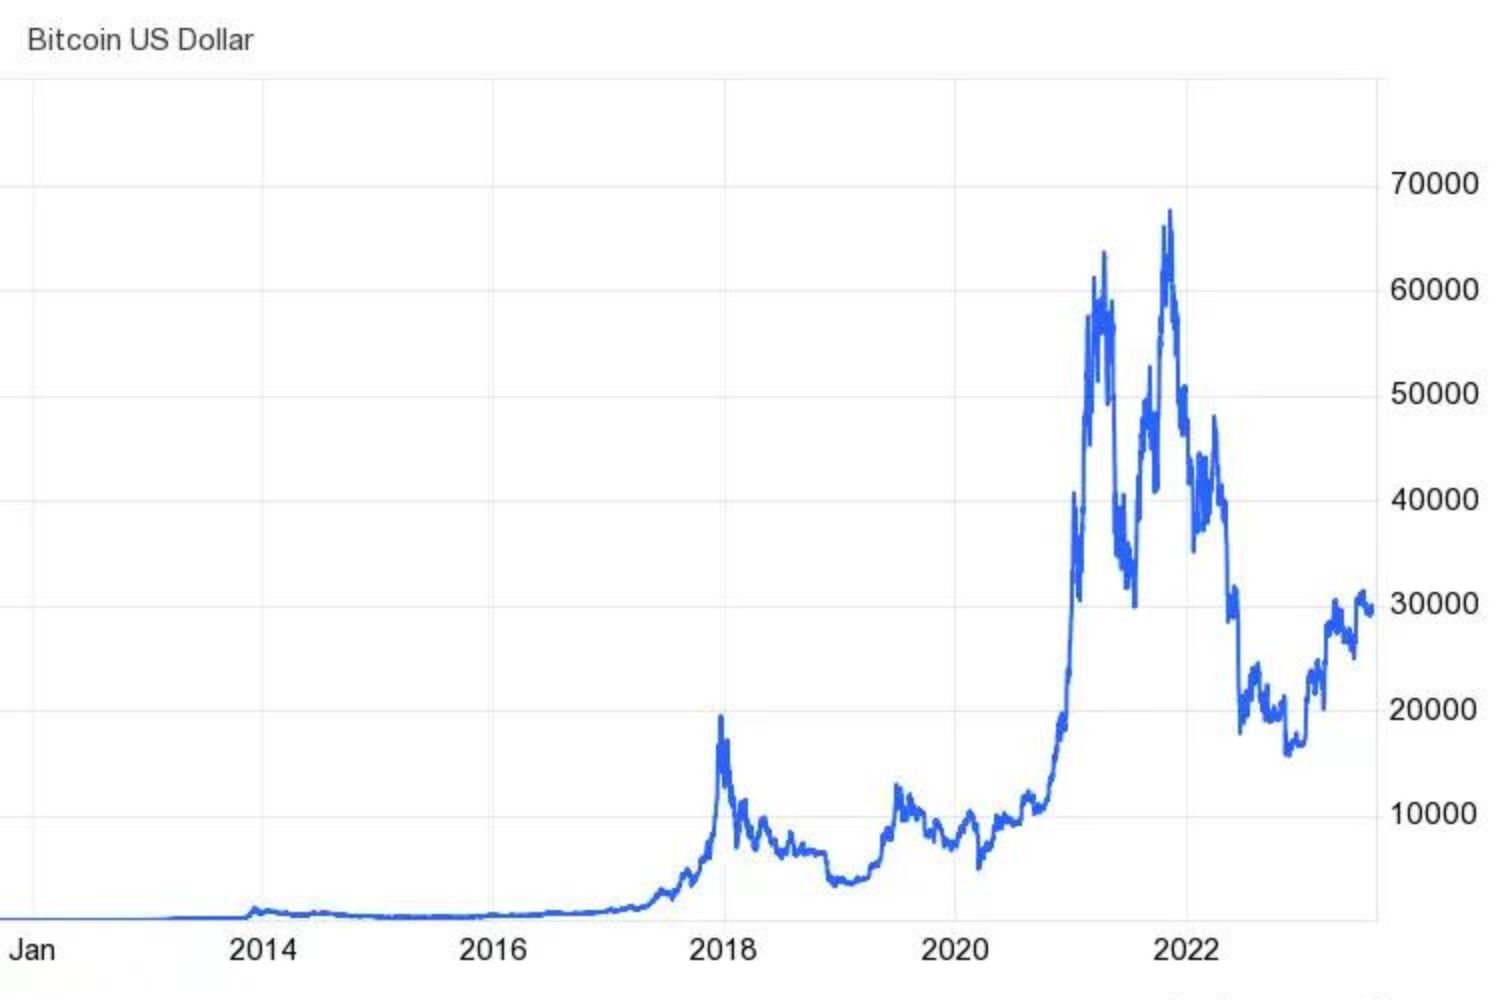 What Was Bitcoin’s Highest Price